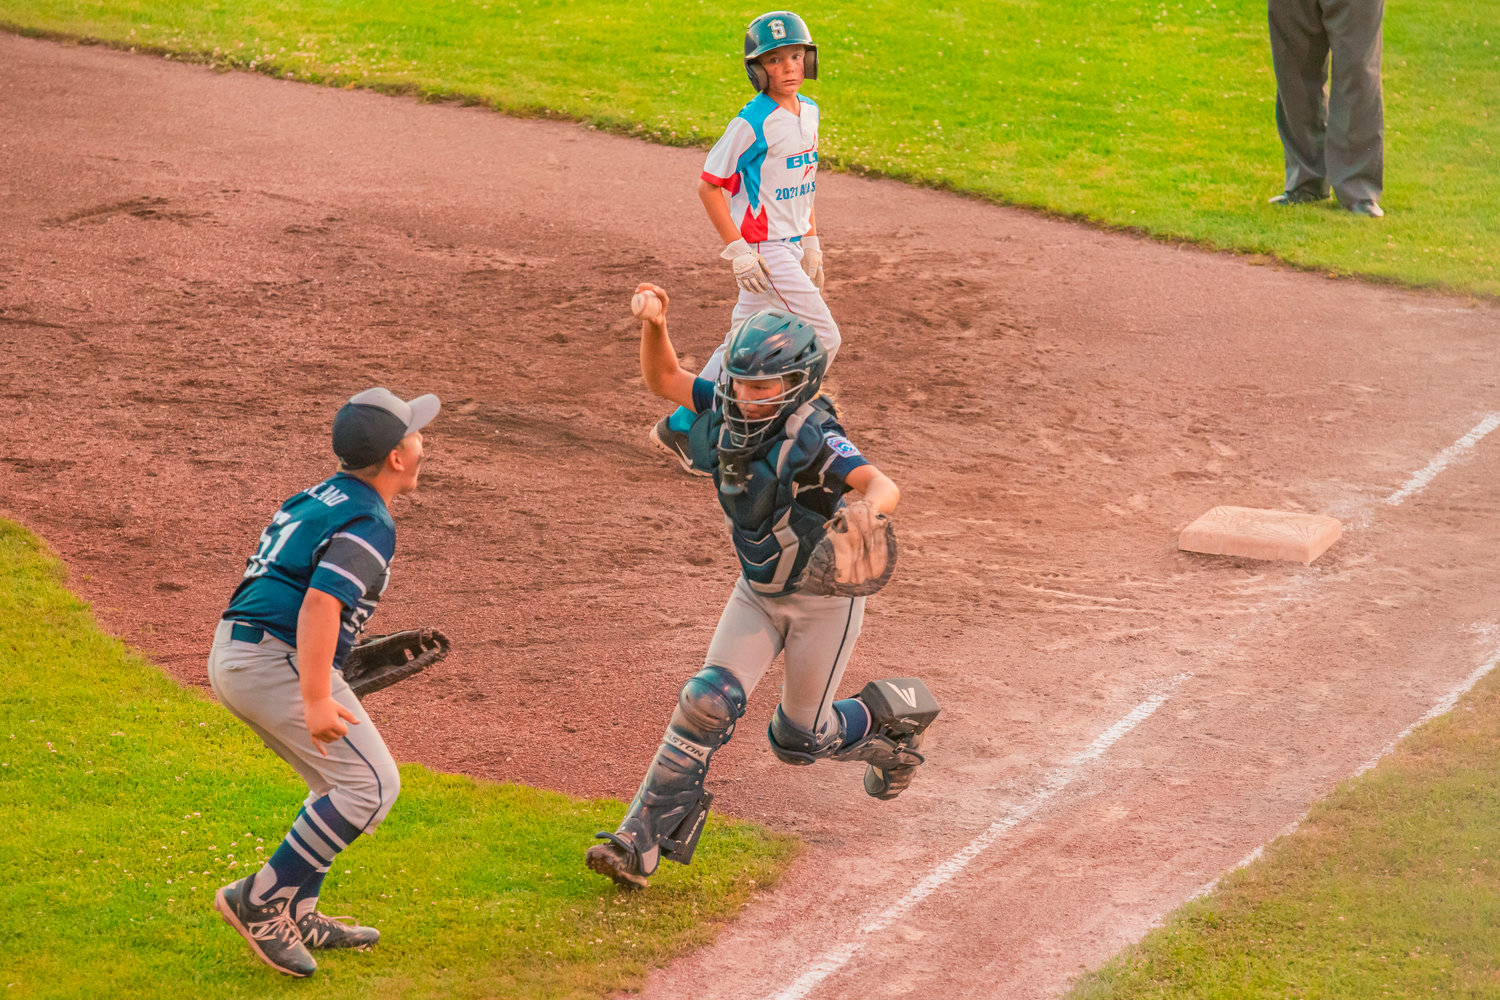 Larch Mountain first baseman Kohlton Wayland (51) celebrates after catcher Marshall Turnquist pulls off an unassisted double play.